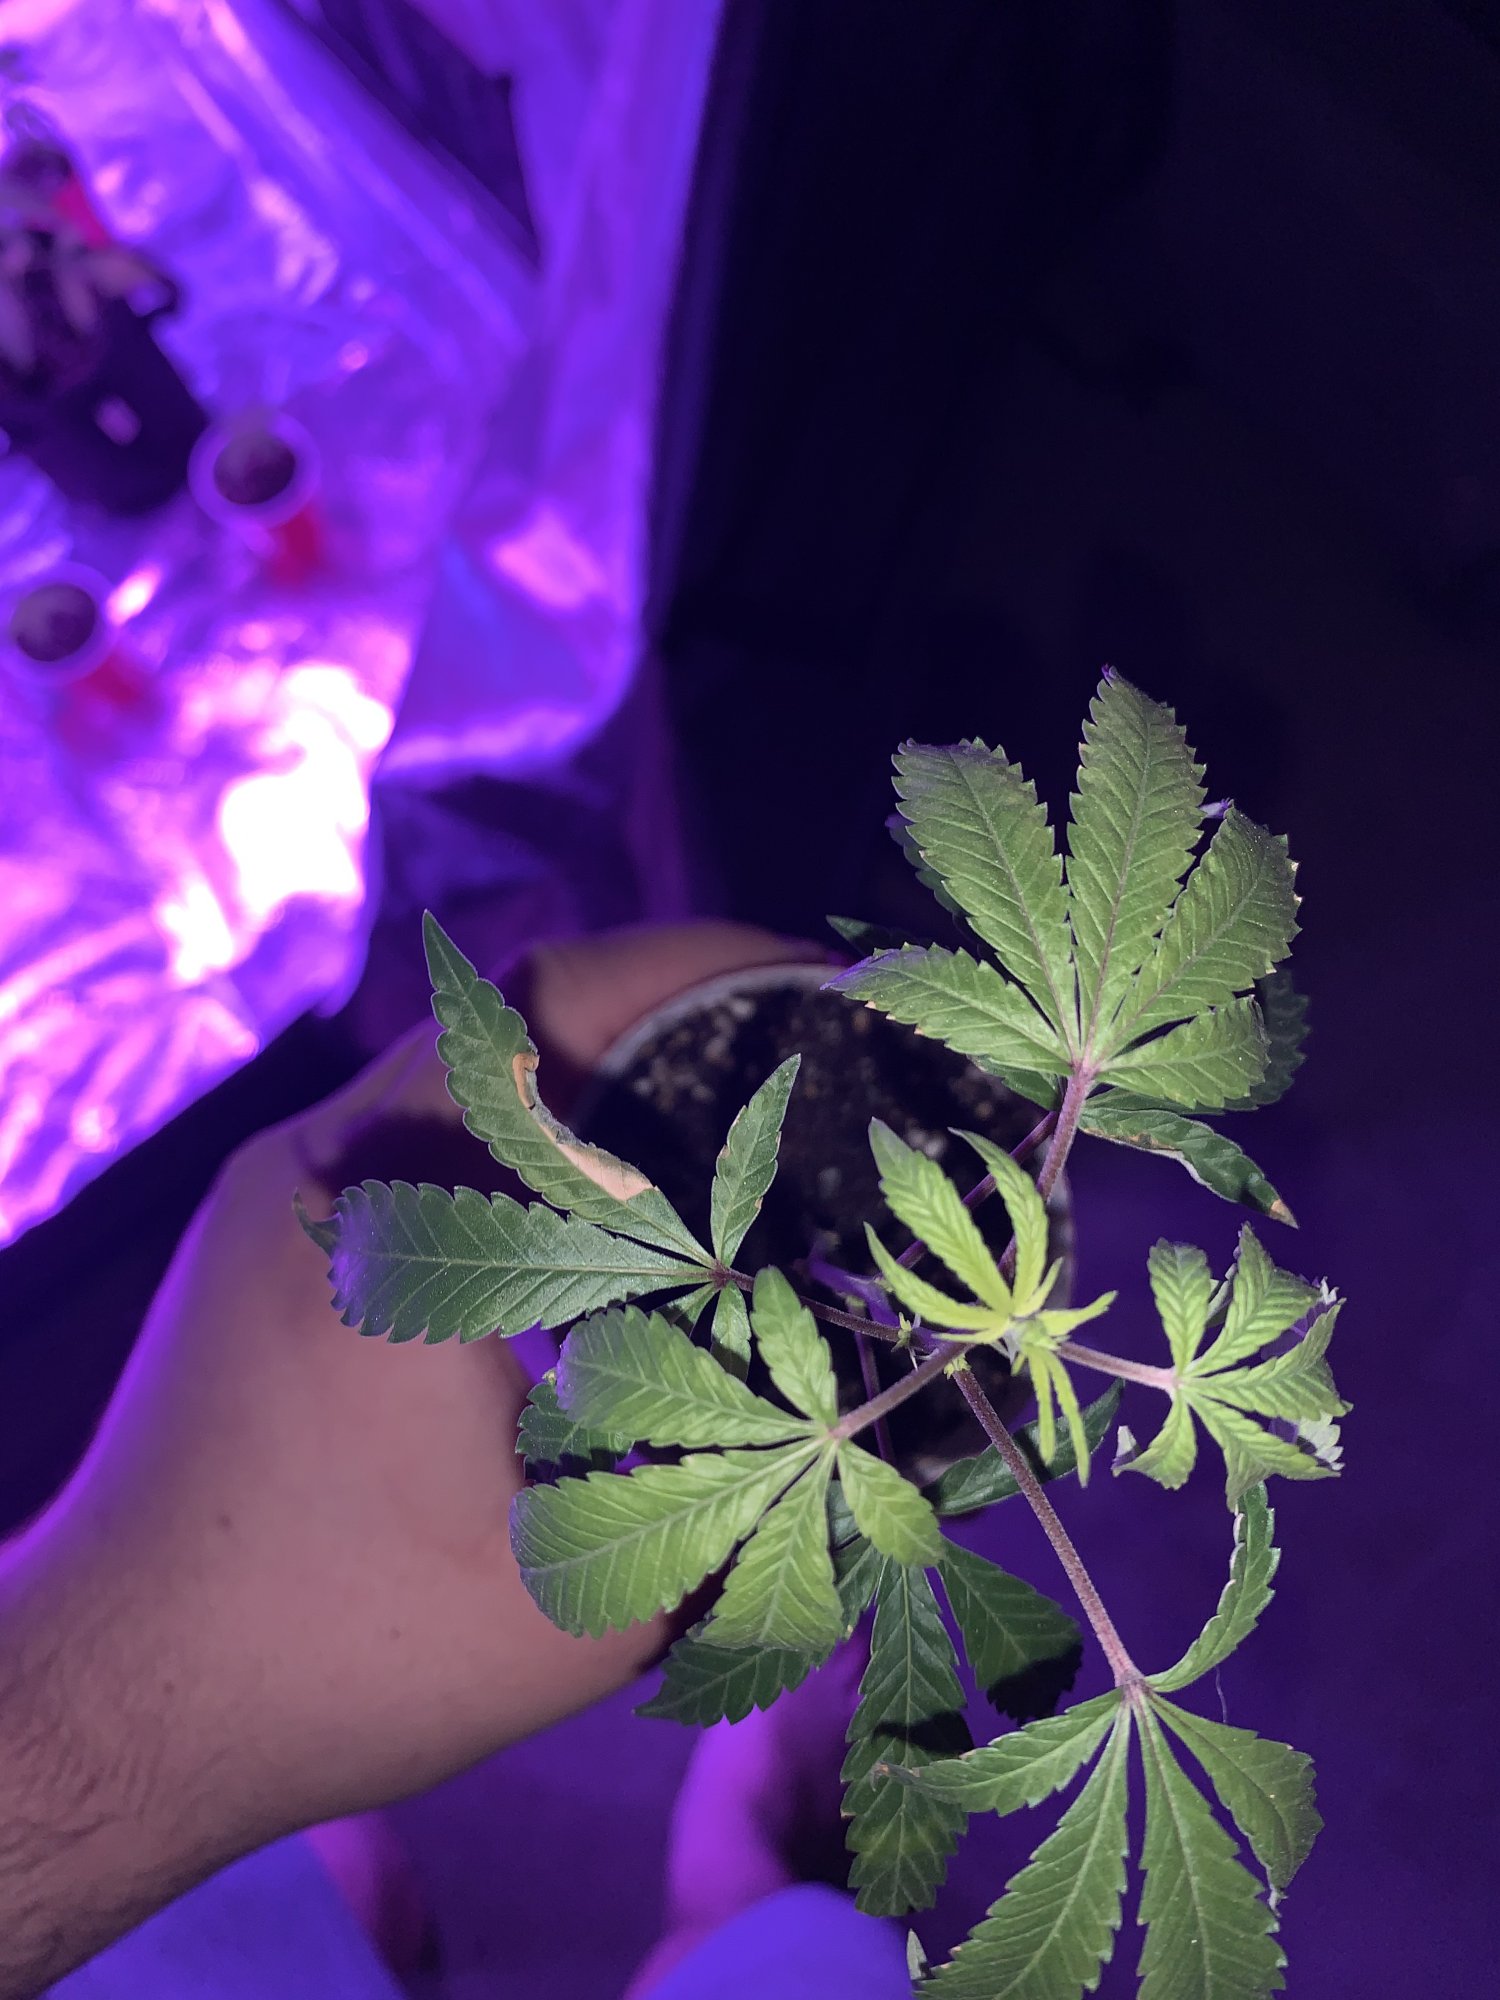 New to indoor growing and this is happening 2